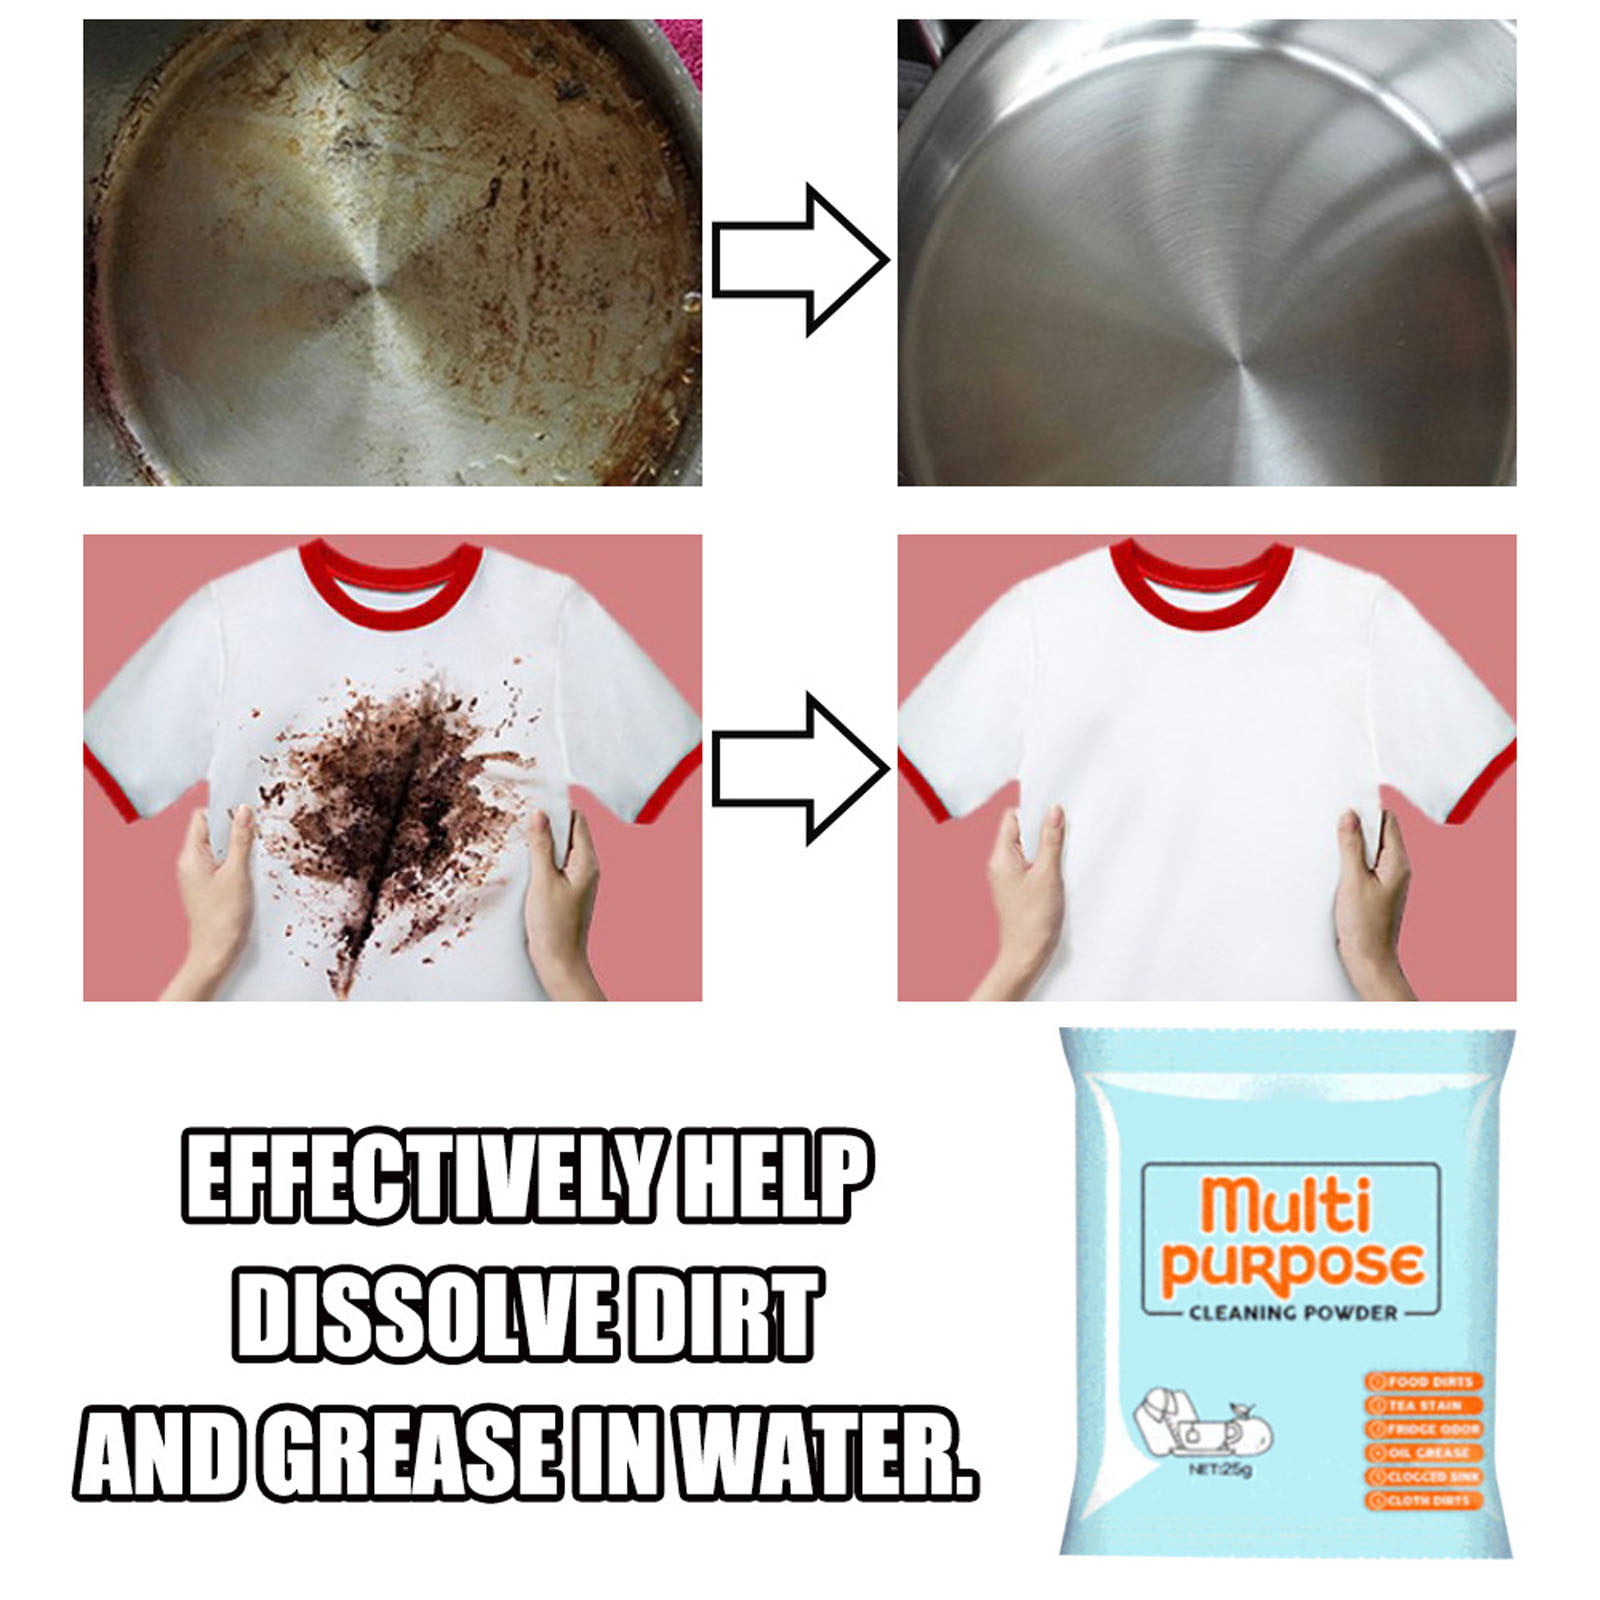 All Purpose Grease Away Powder Cleaner Buy More Save More Trendy Product in 2021 